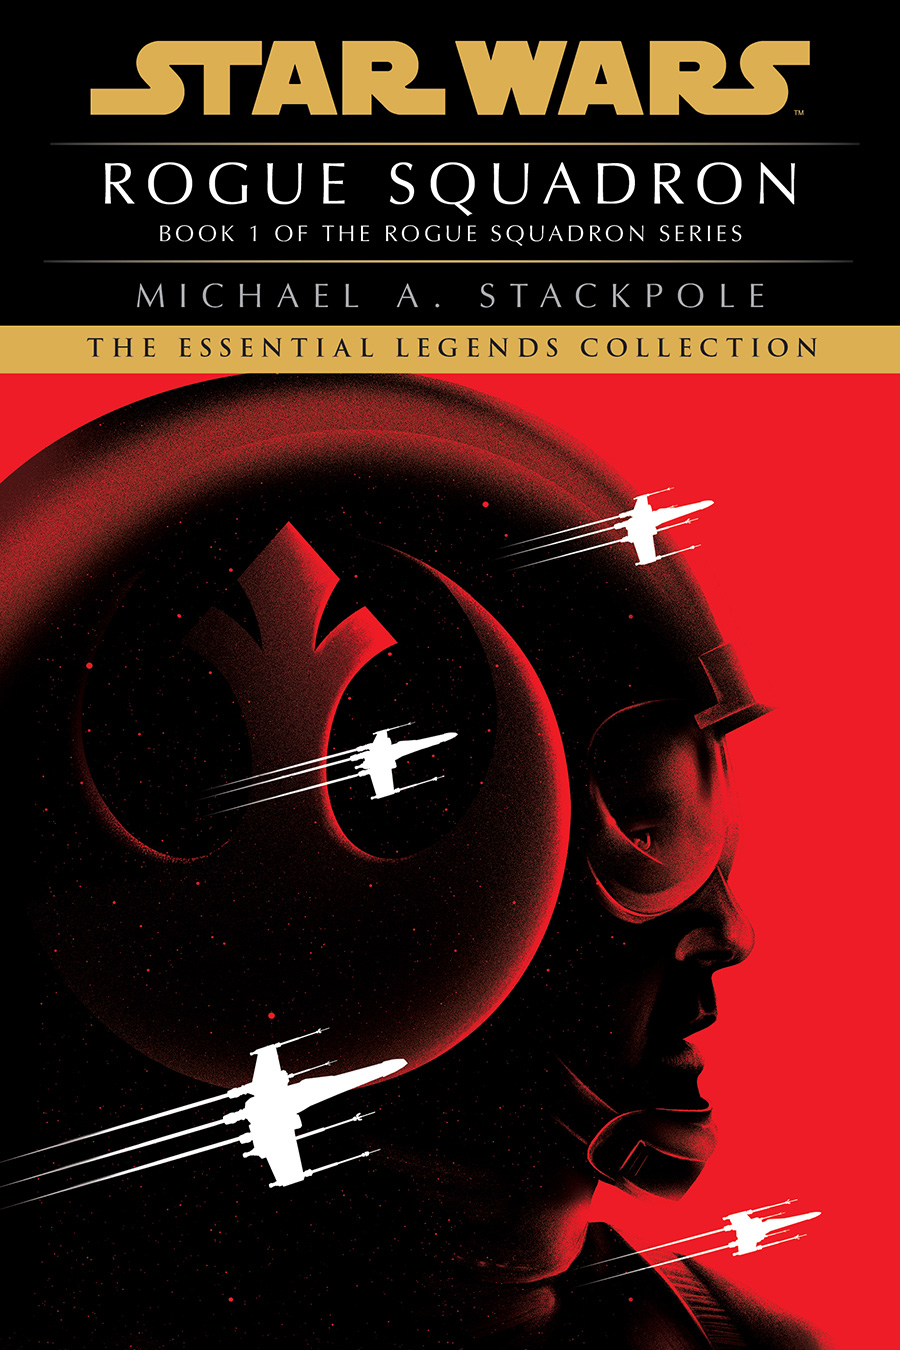 Rogue-squadron-book-cover-doaly